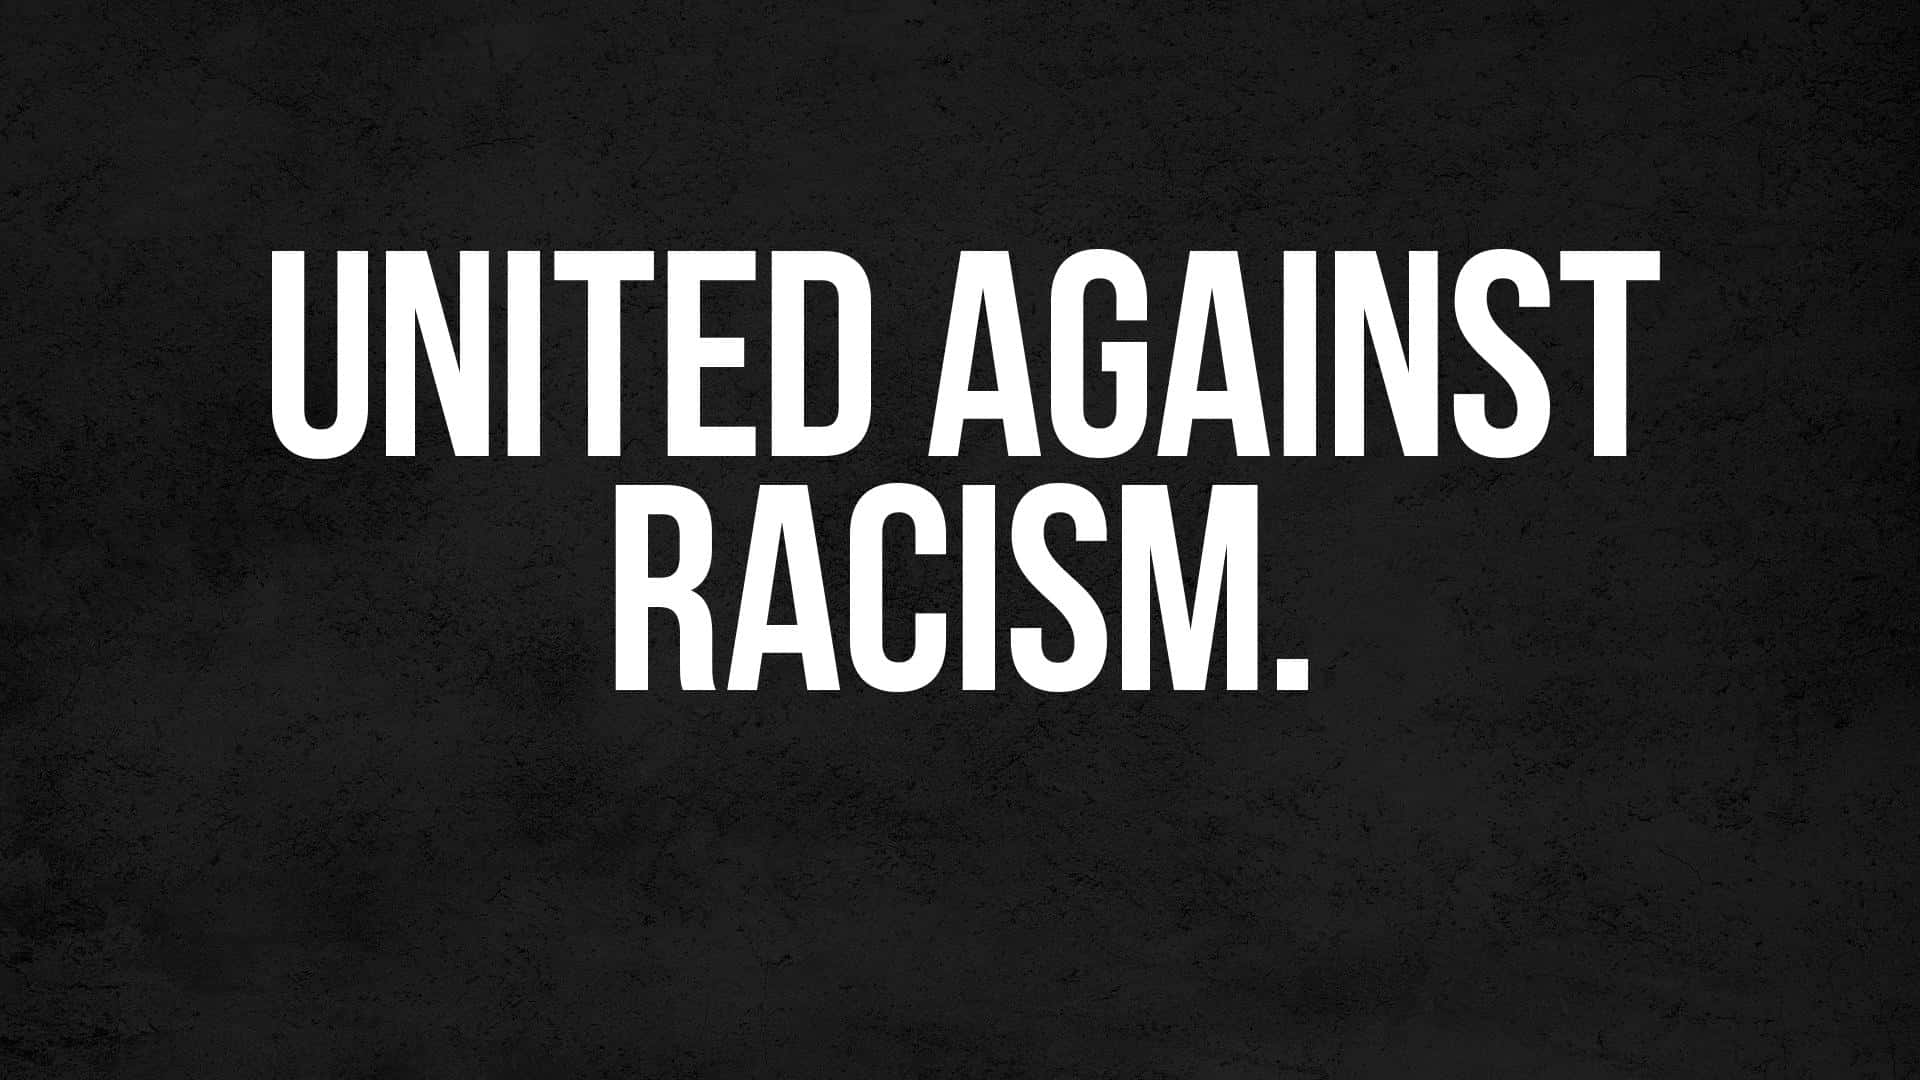 United Against Racism In Capital Letters Wallpaper